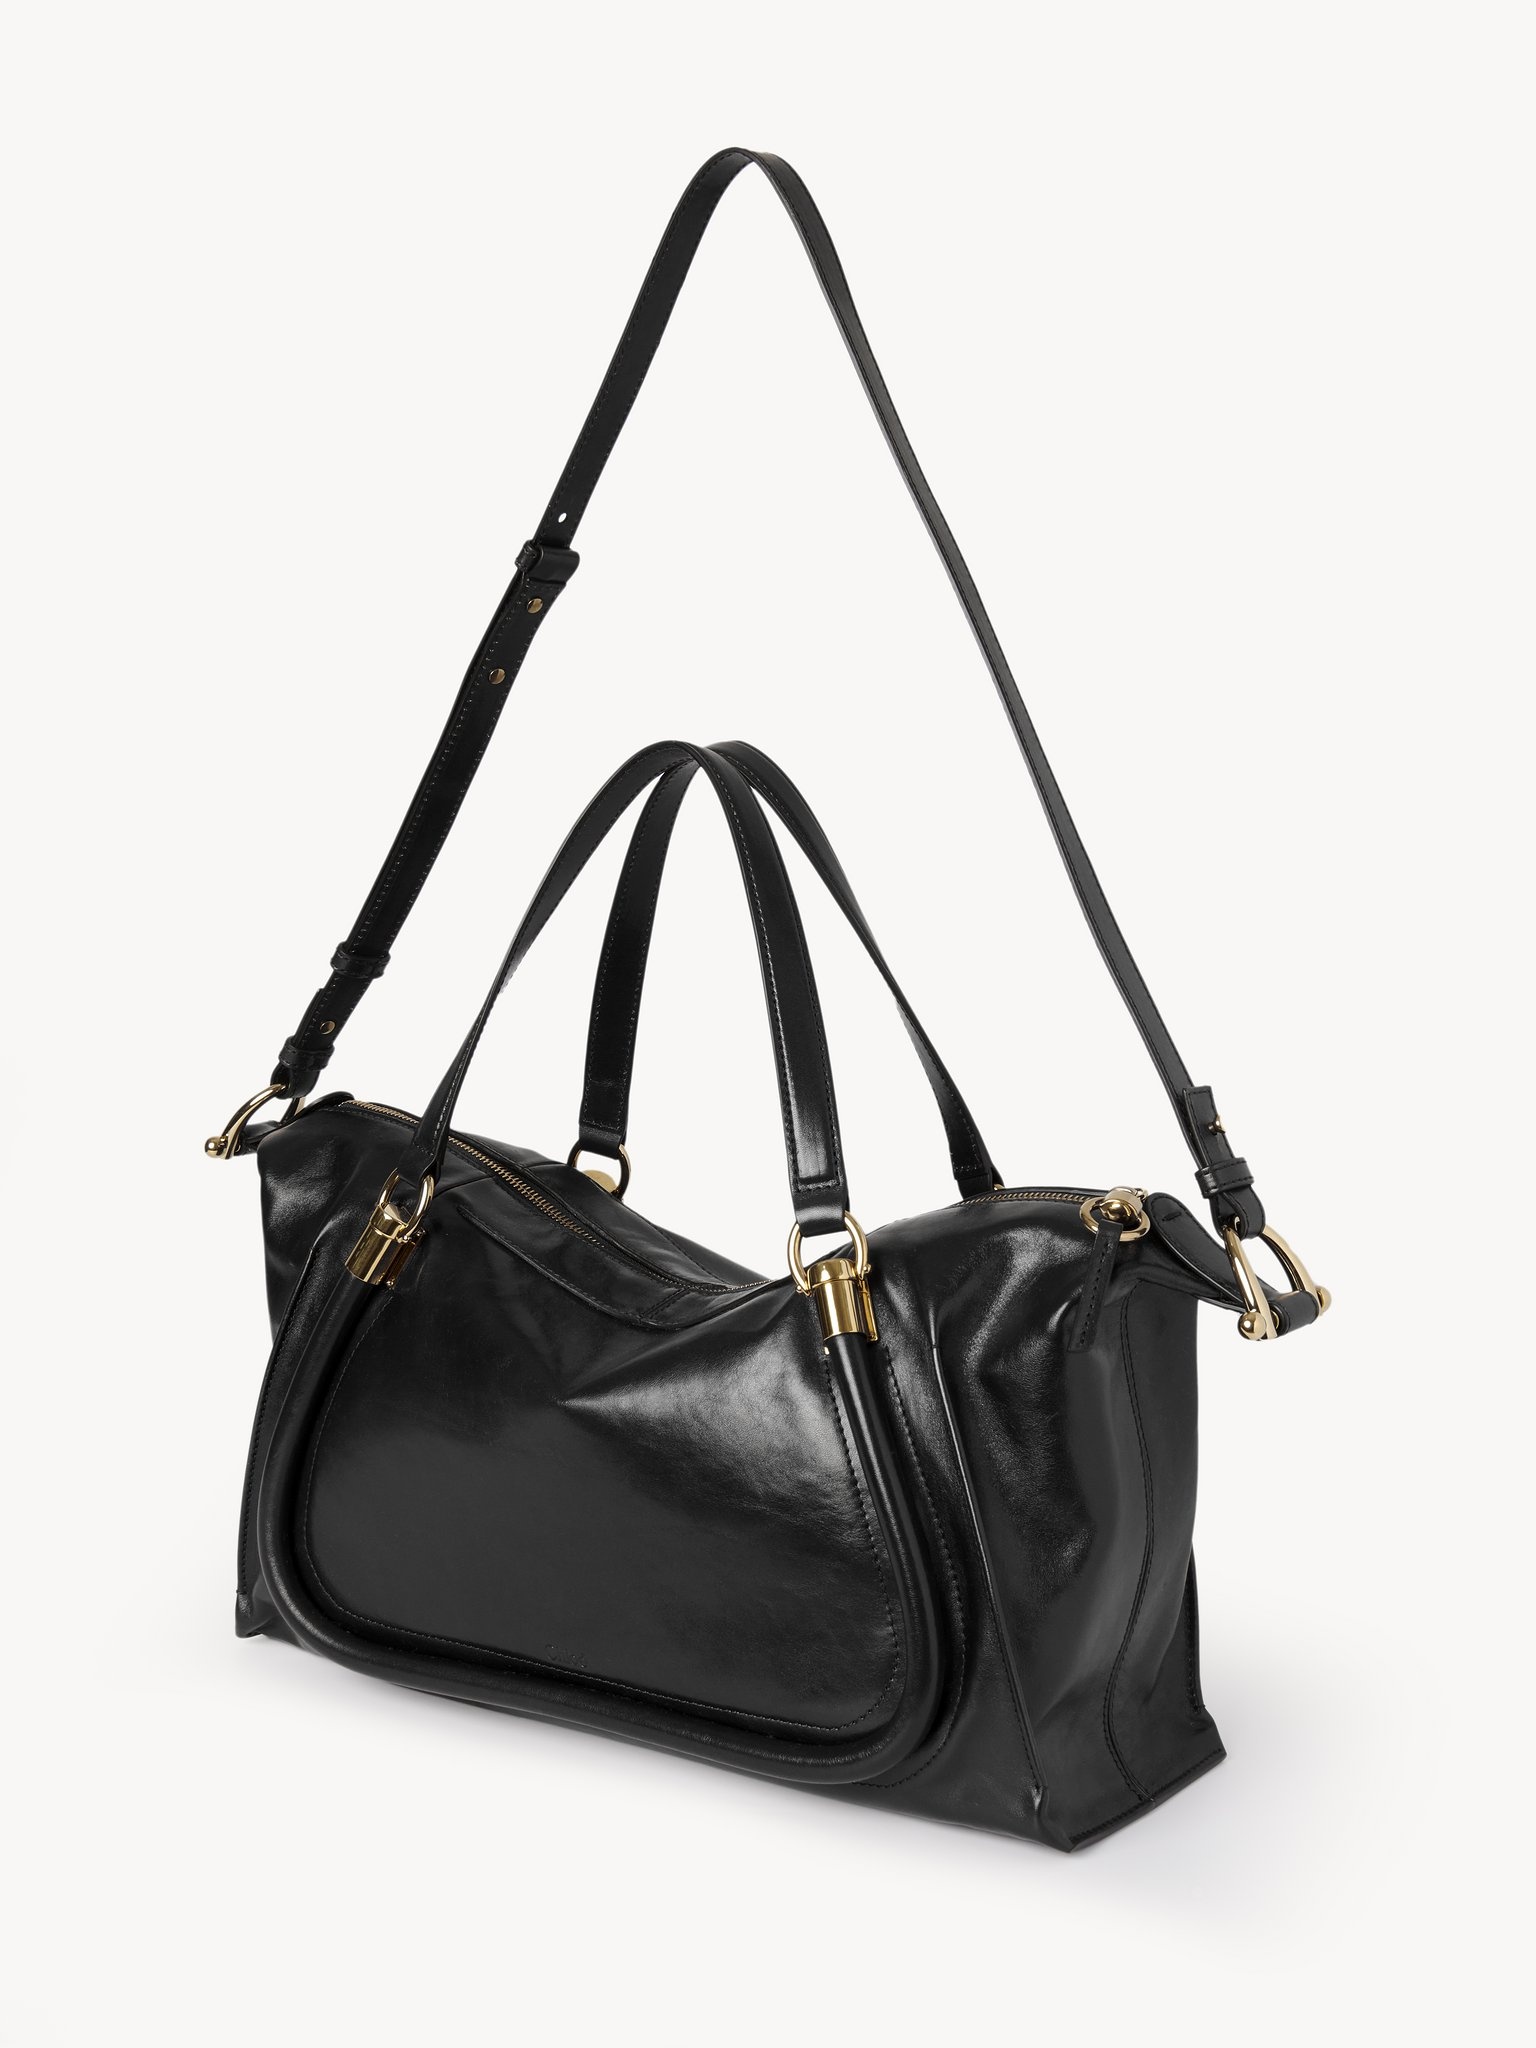 PARATY 24 BAG IN SOFT LEATHER - 2